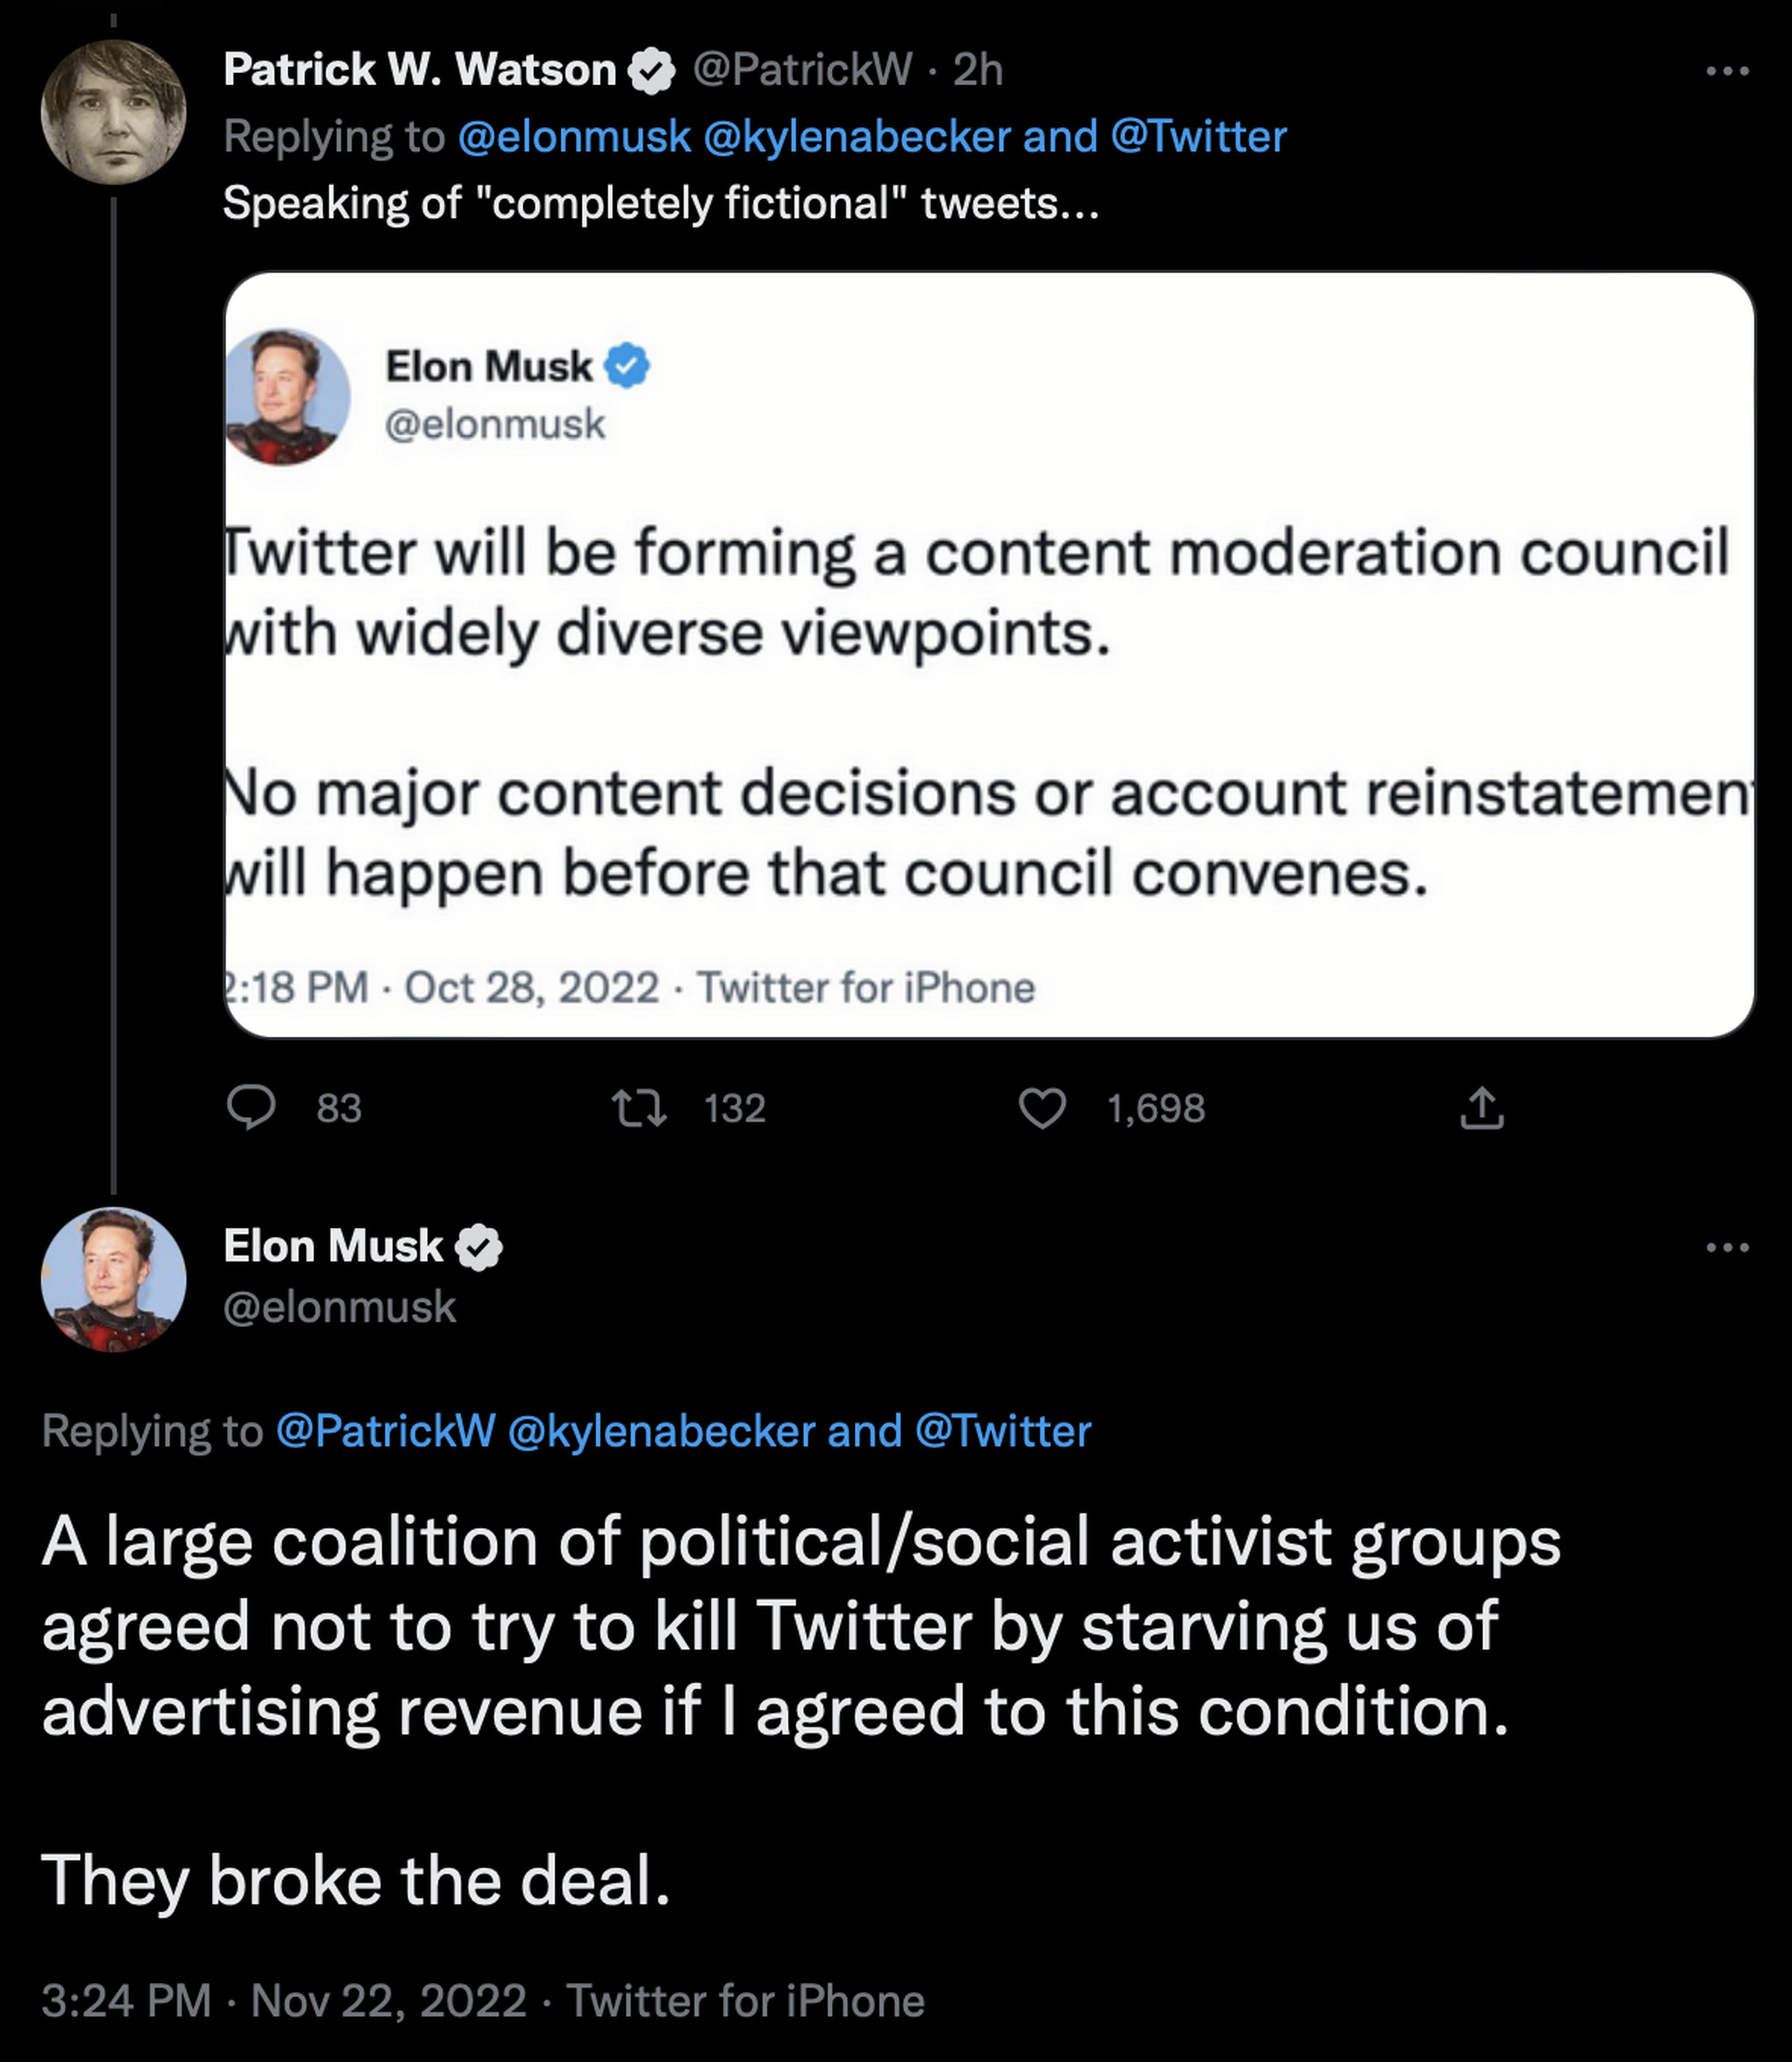 Screenshot of Elon Musk’s reply to a tweet calling his content moderation council promise completely fiction. Musk says: “A large coalition of political/social activist groups agreed not to try to kill Twitter by starving us of advertising revenue if I agreed to this condition. They broke the deal.”